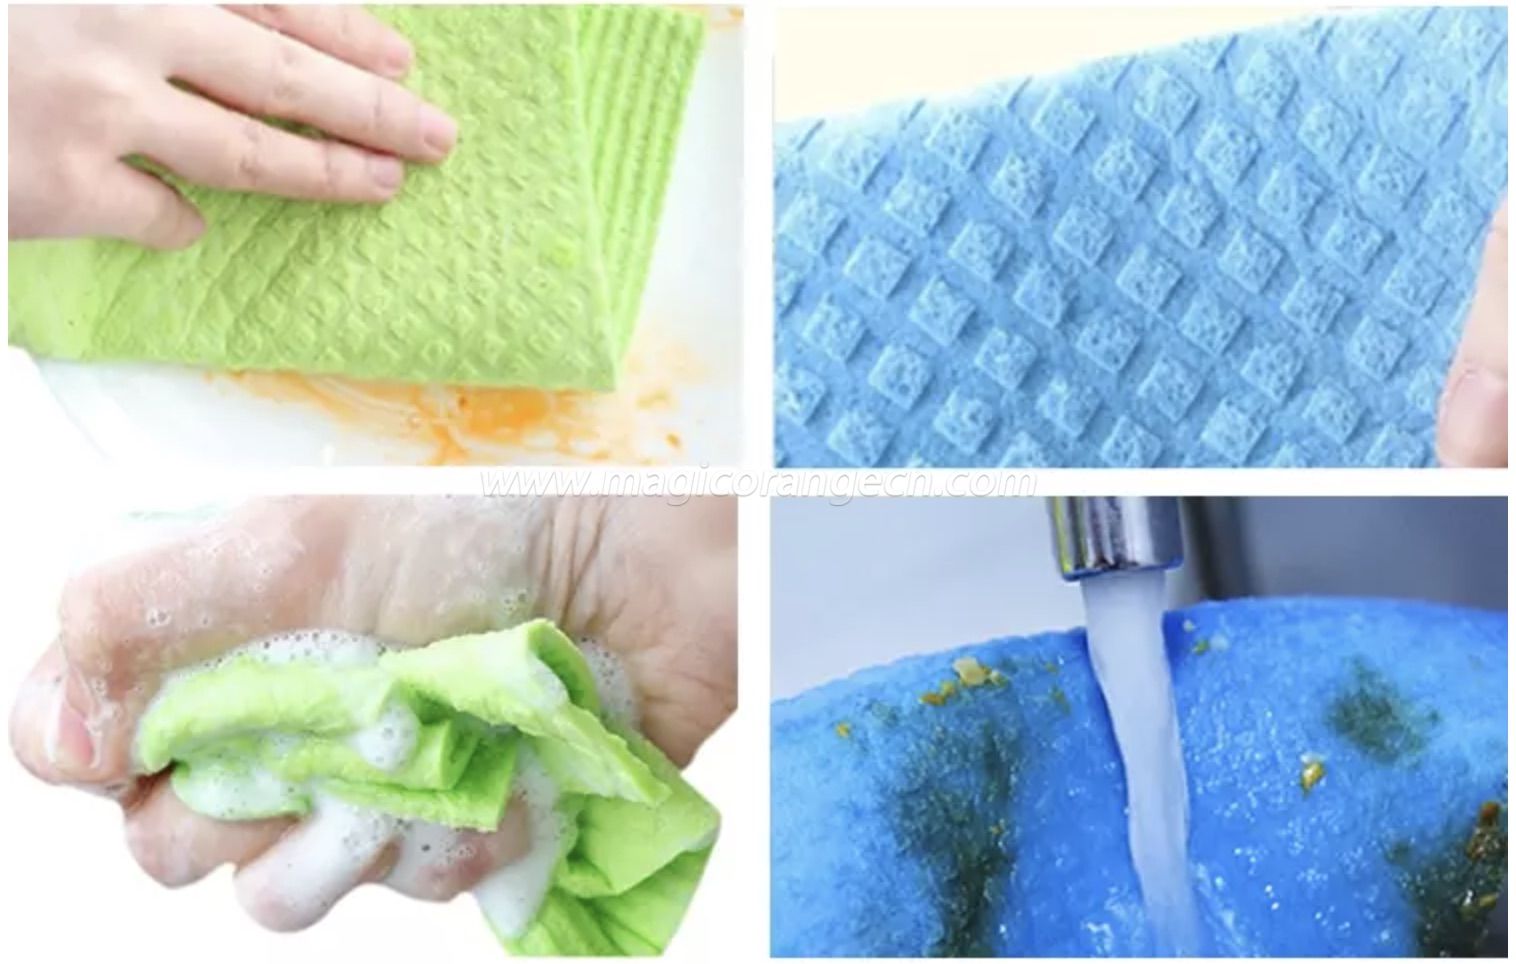 DC1005 Biodegradable Cellulose Wood Pulp Dishcloth